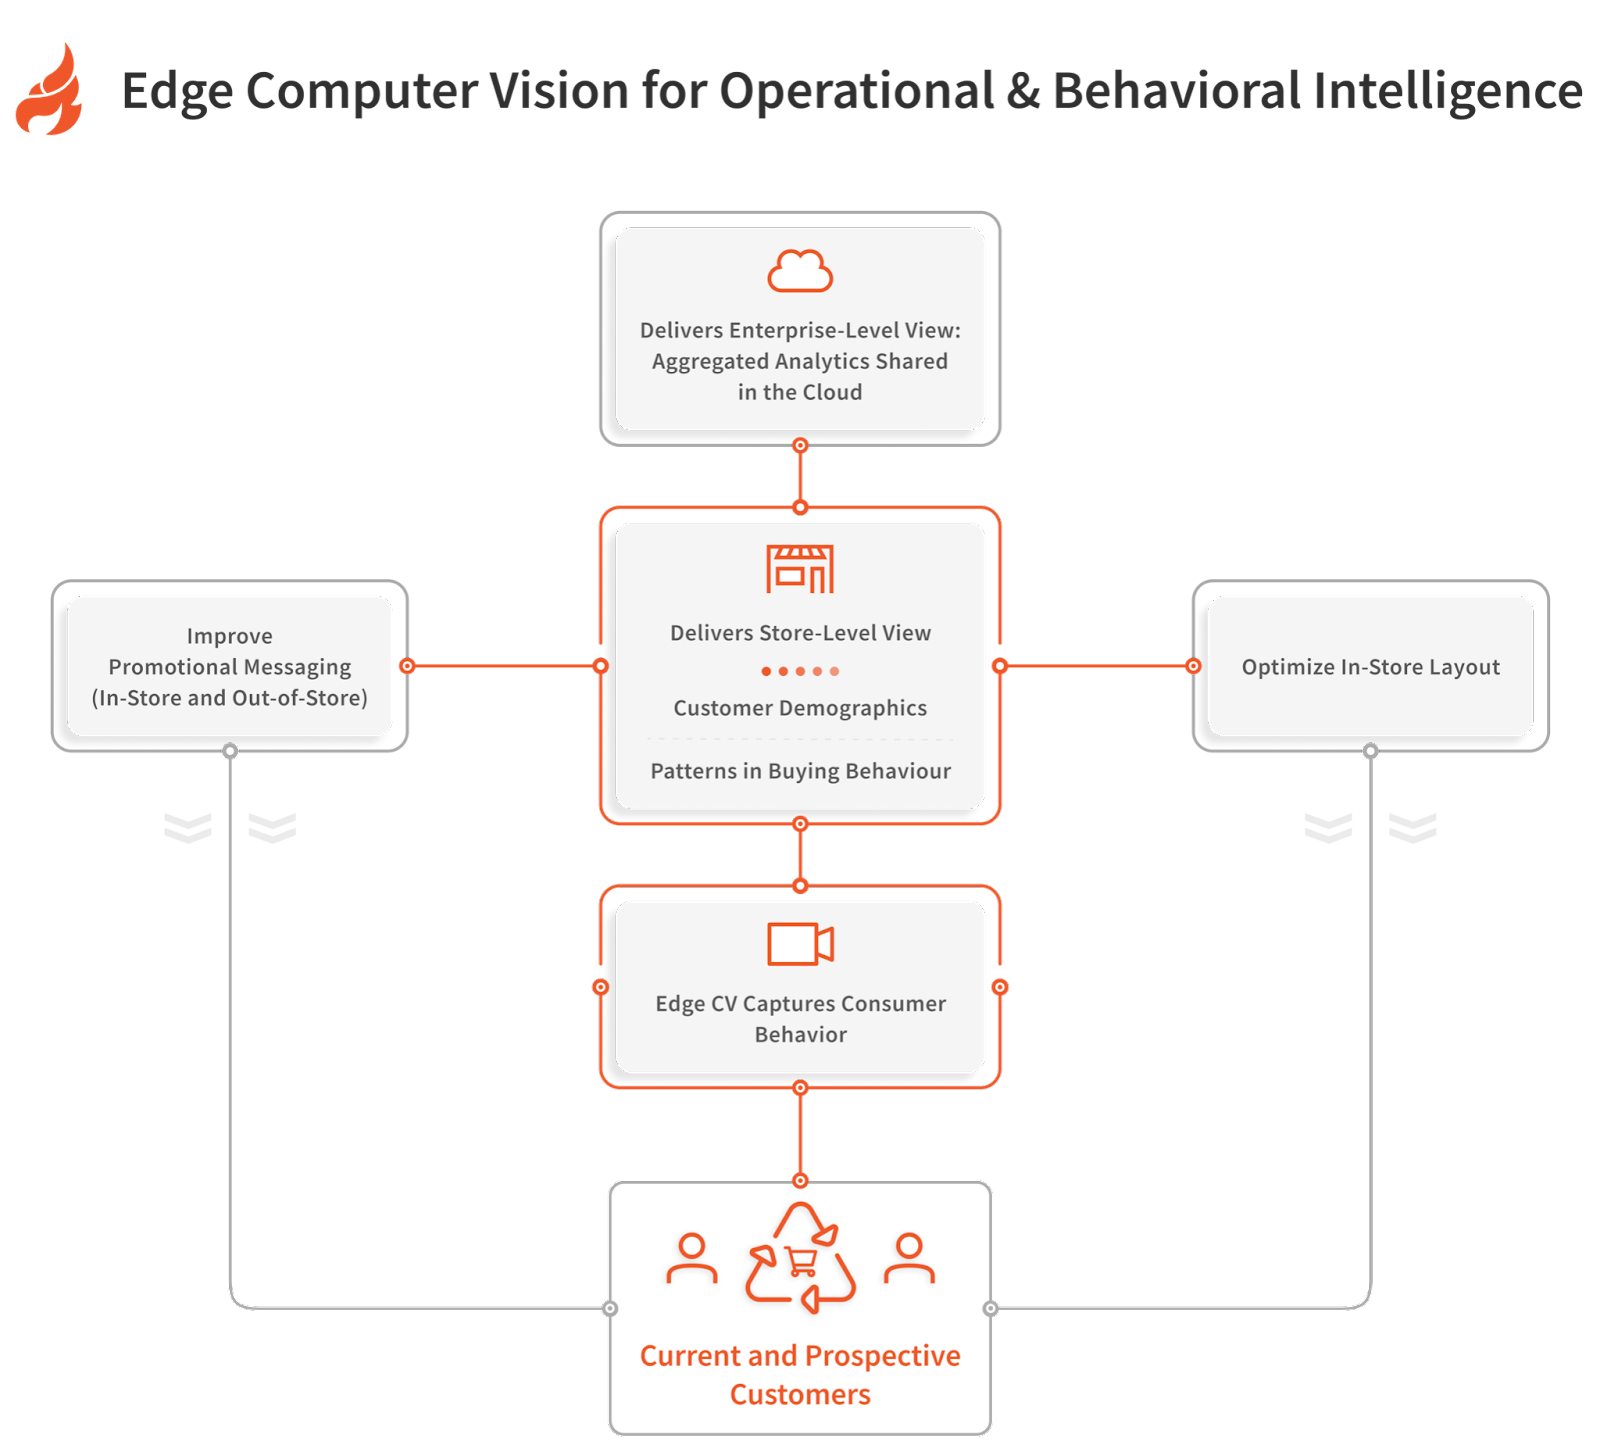 Edge Computer Vision for Operational and Behavioral Intelligence